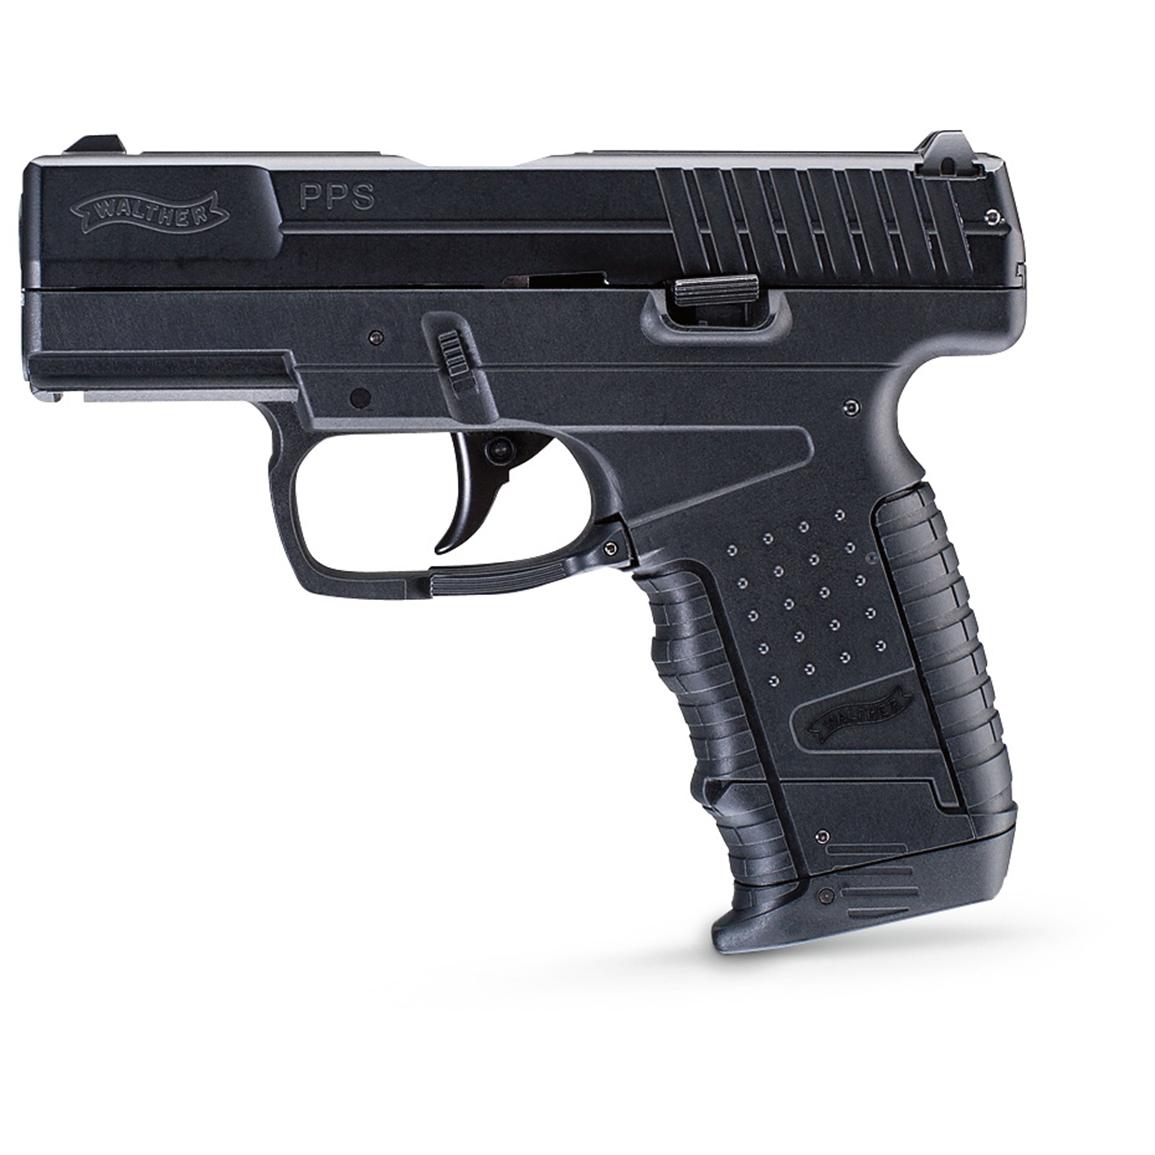 umarex-walther-pps-air-pistol-black-588682-air-bb-pistols-at